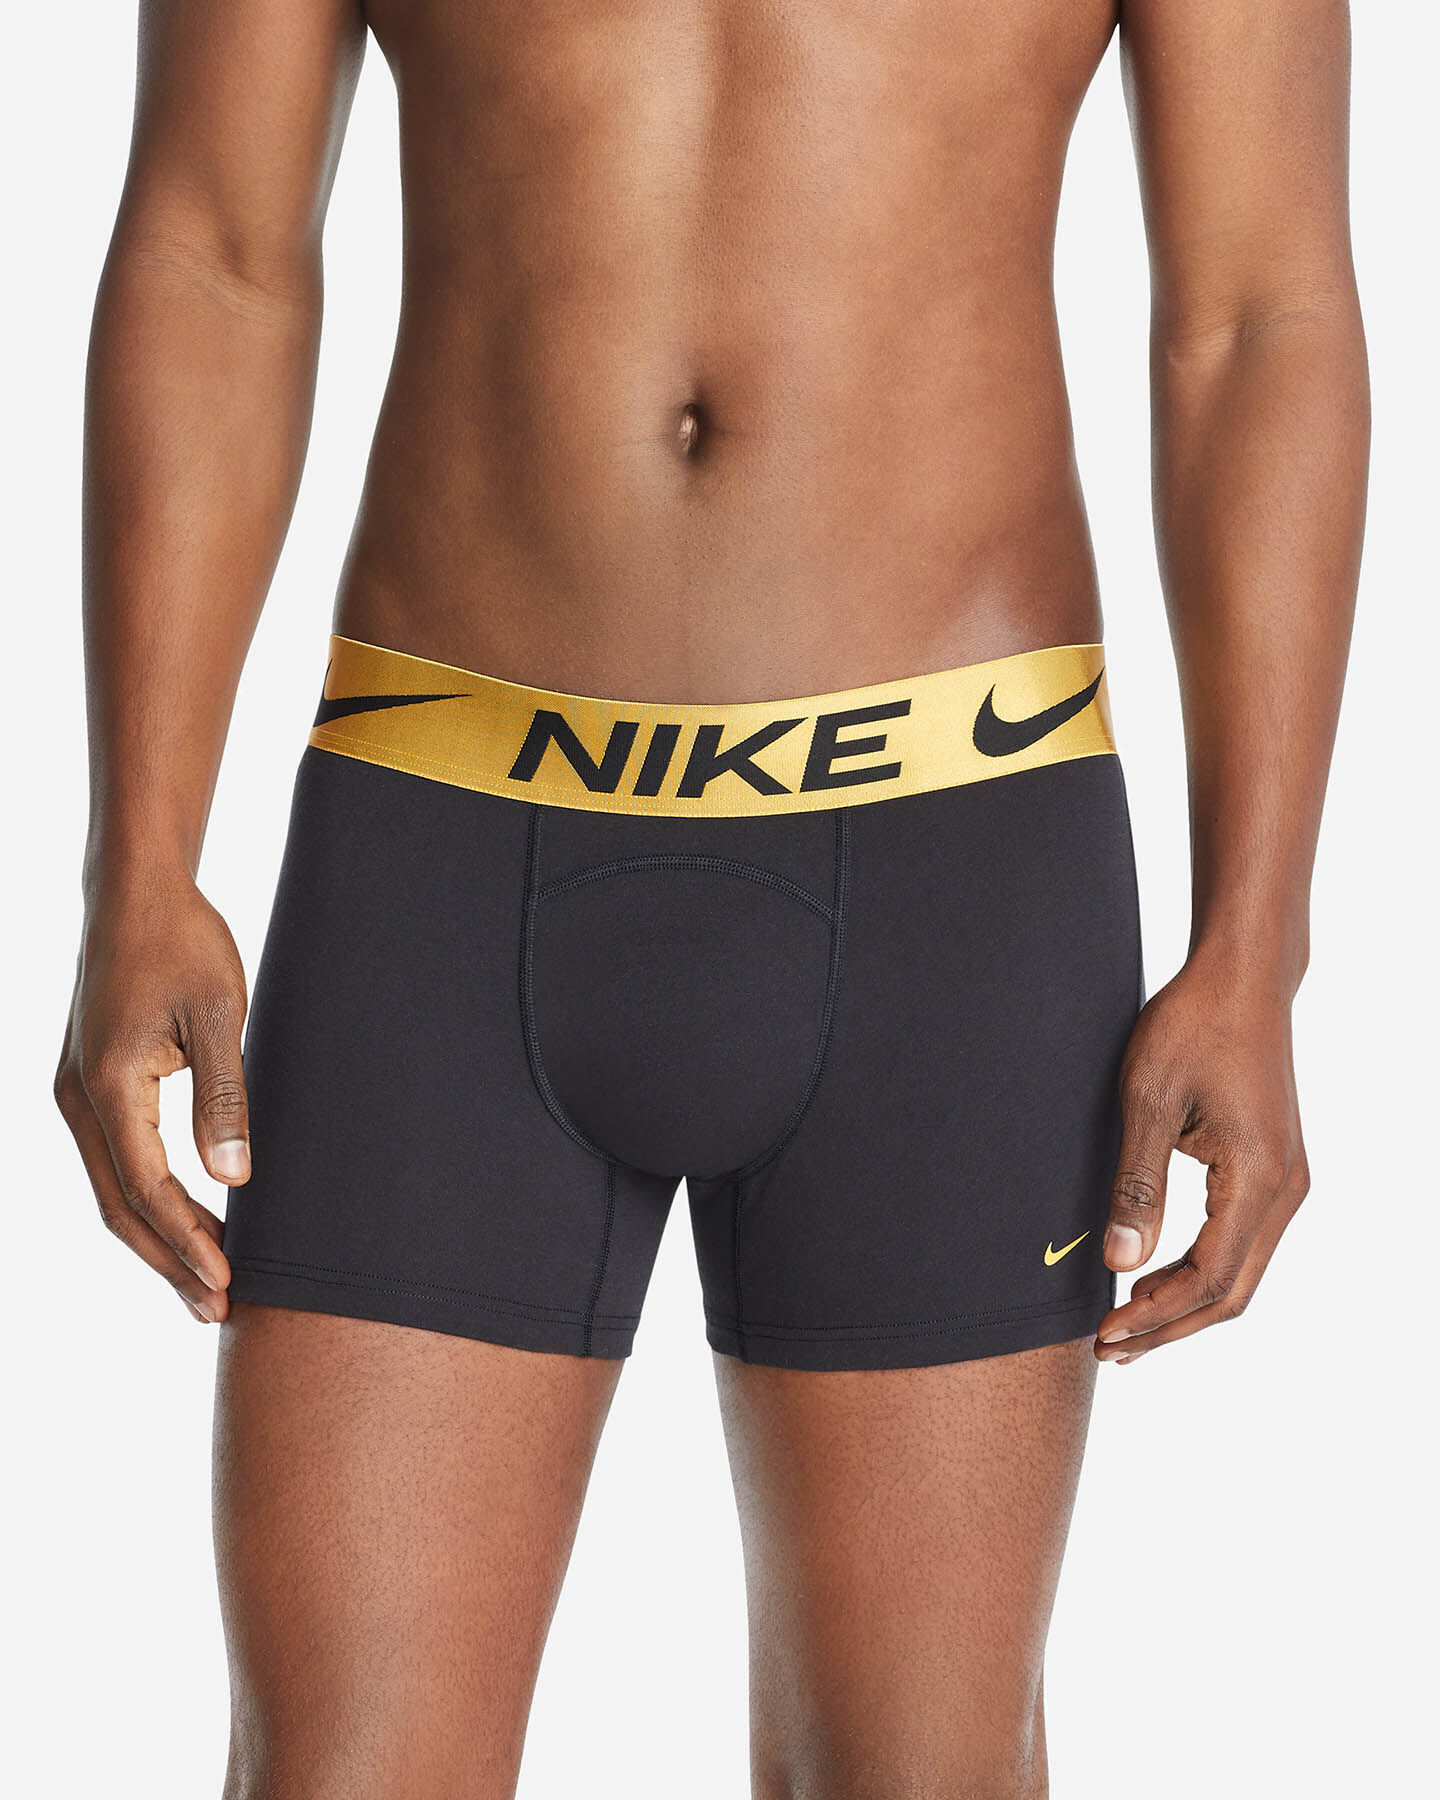  Intimo NIKE BOXER LUXE M S4099892|M1Q|XL scatto 1